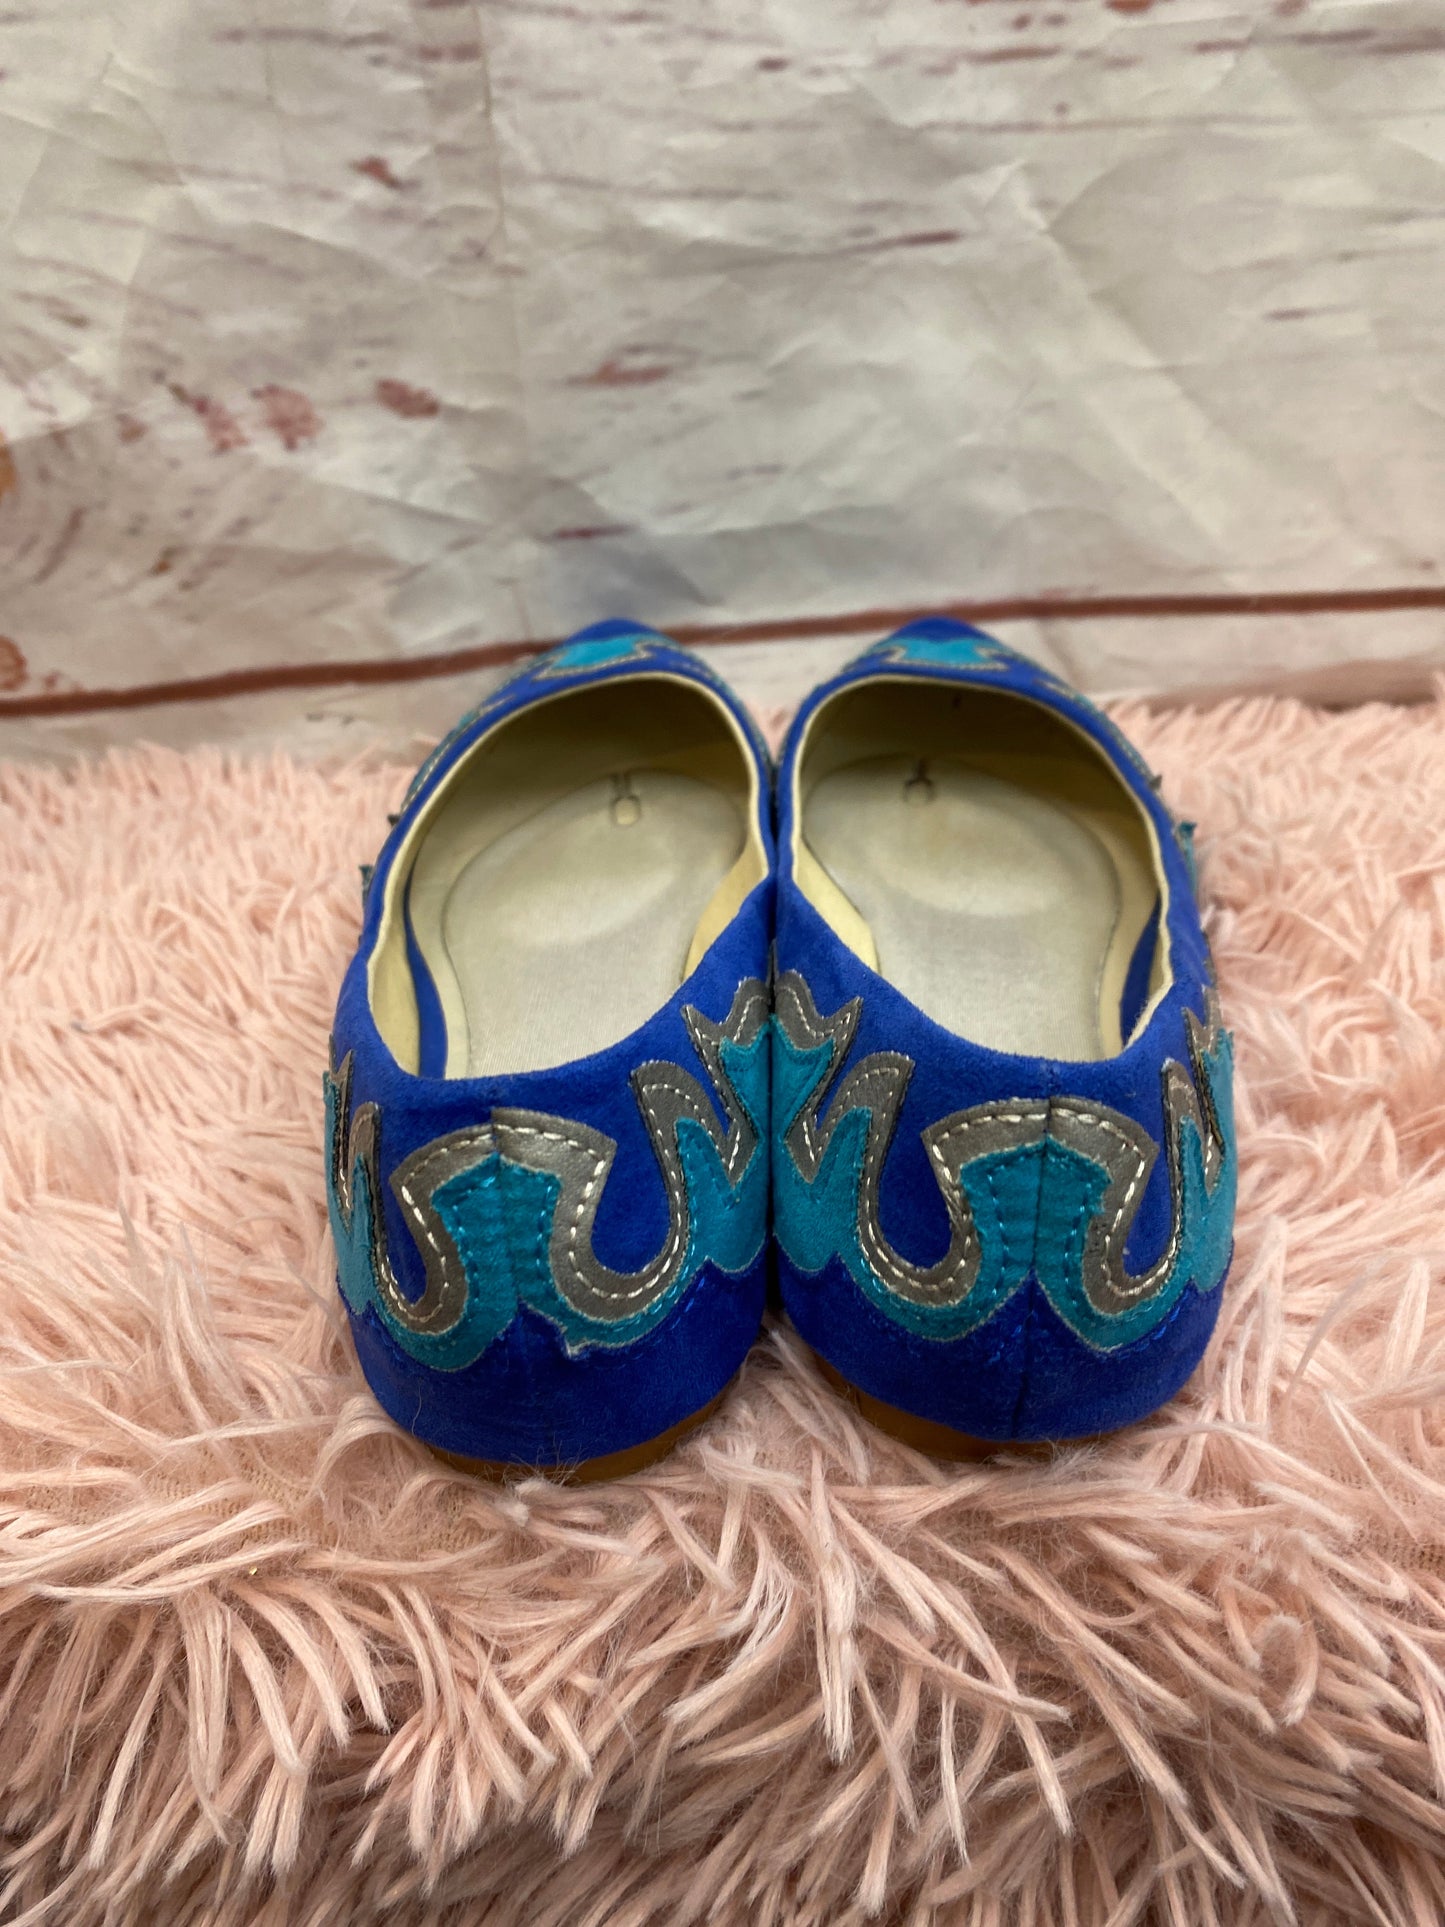 Shoes Flats Ballet By Clothes Mentor  Size: 7.5